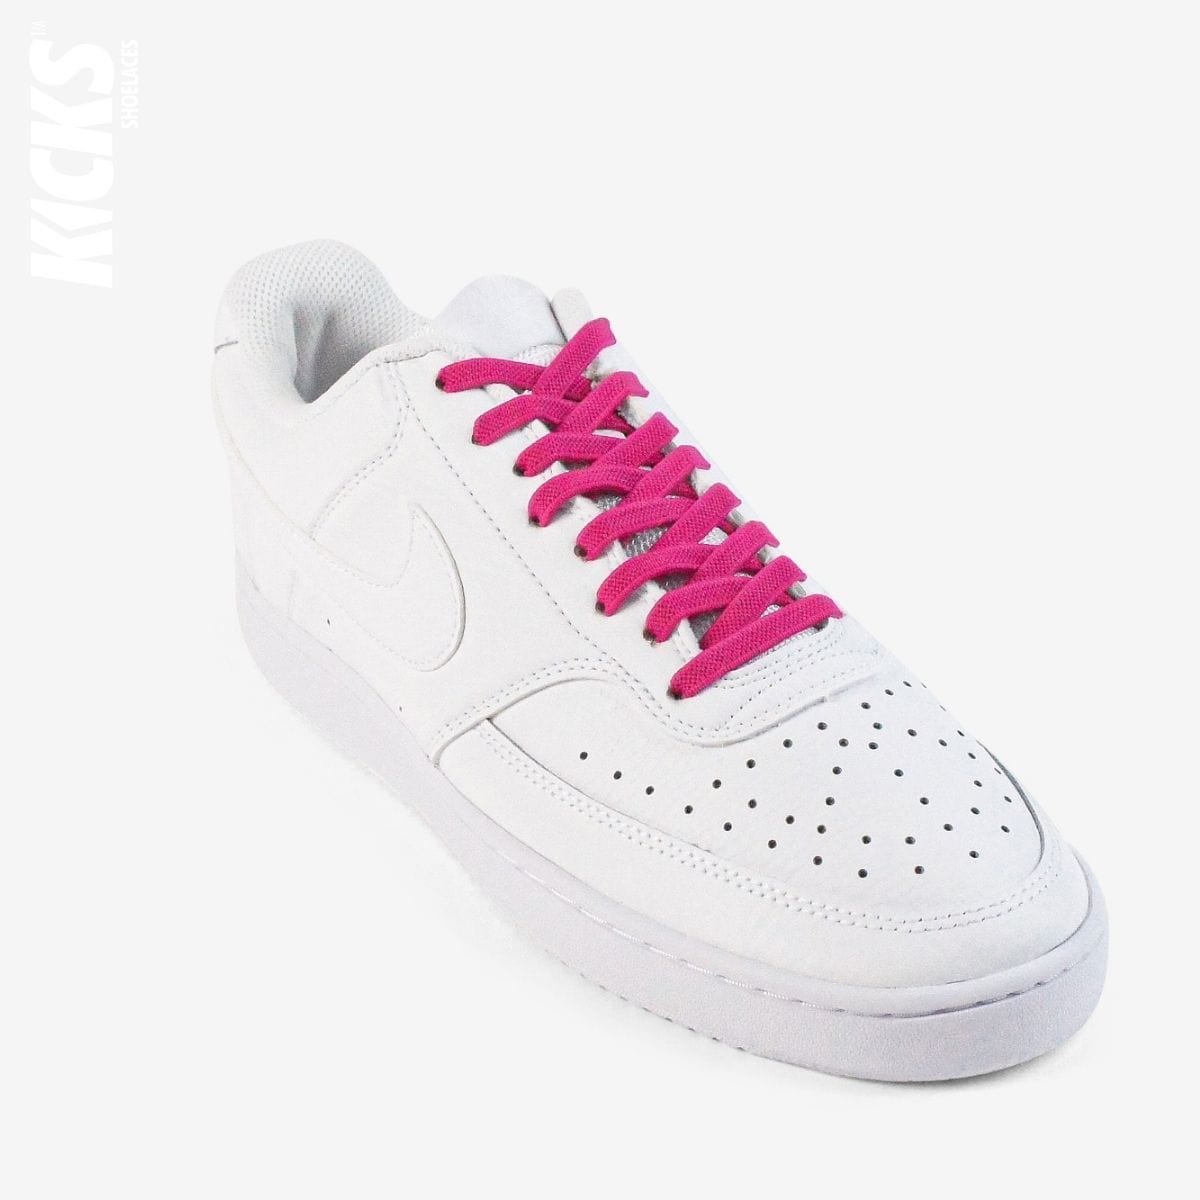 no-tie-shoelaces-with-rose-pink-laces-on-nike-white-sneakers-by-kicks-shoelaces